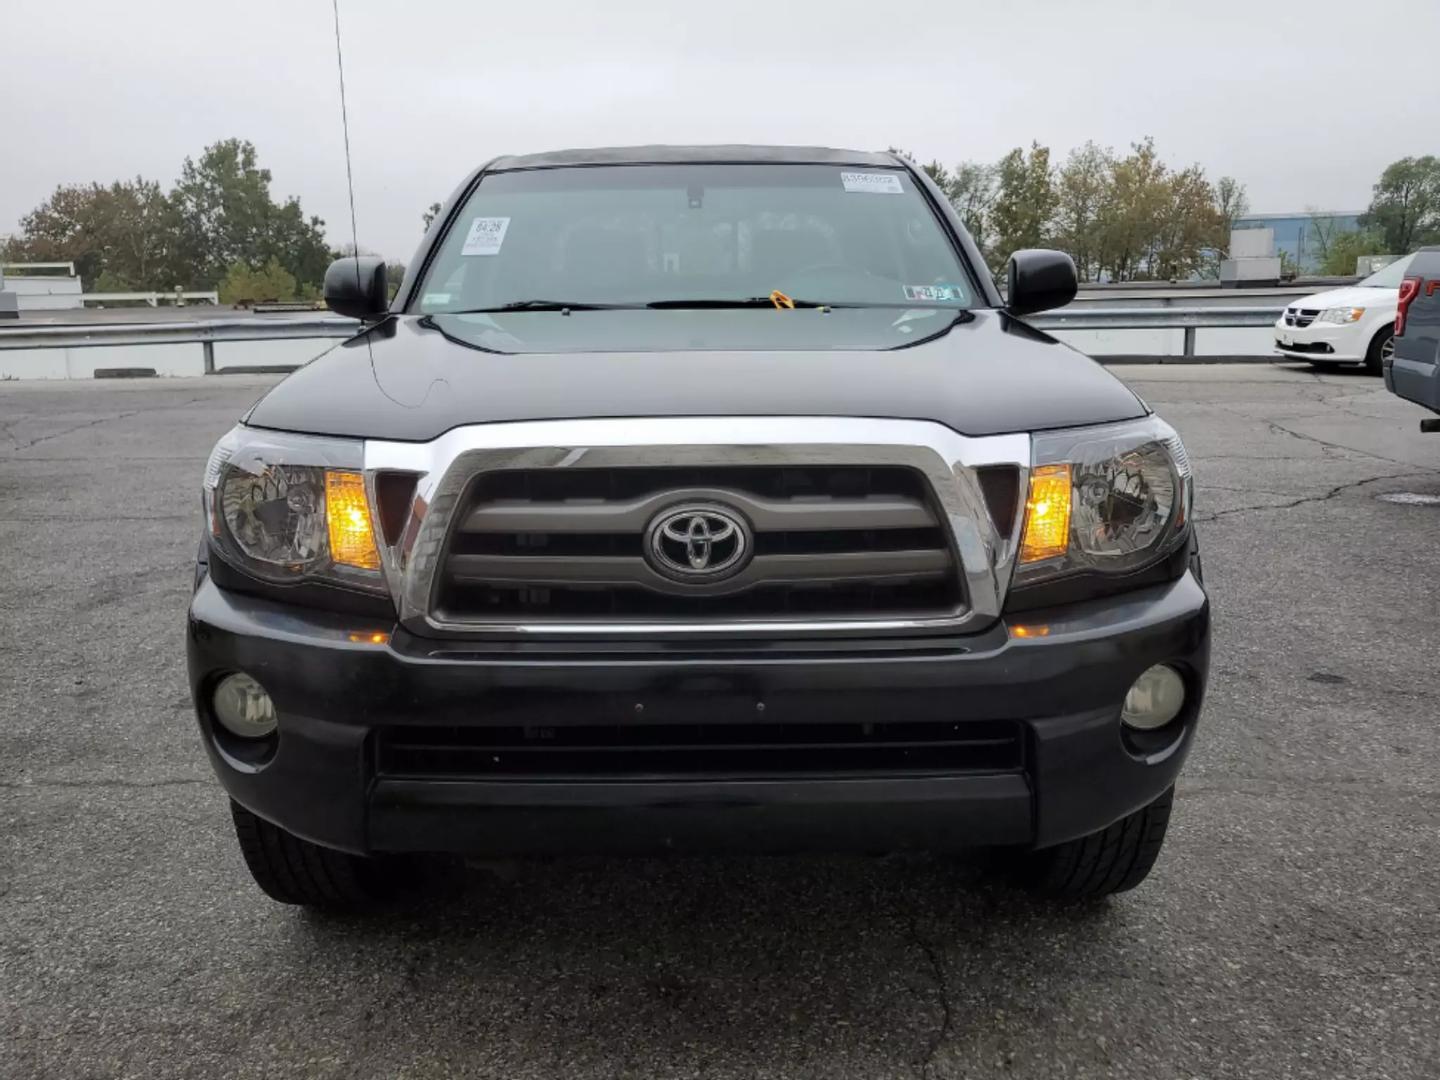 2009 TOYOTA TACOMA DOUBLE CAB $995 DOWN & DRIVE IN 1 HOUR.